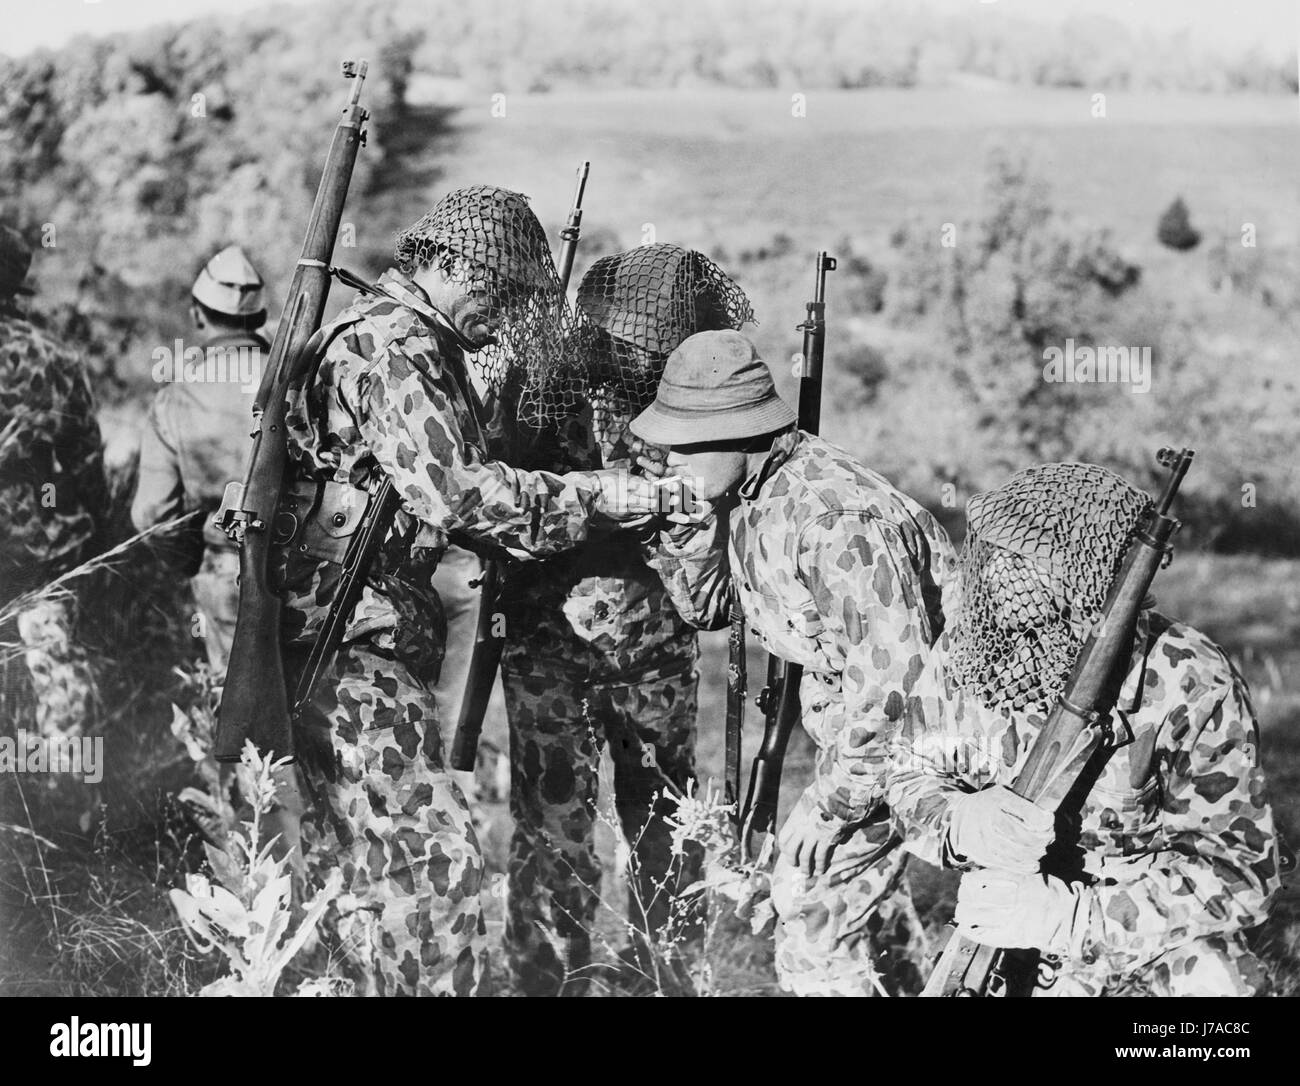 U.S. Army soldiers wearing leopard-spotted suits to blend into the landscape, circa 1942. Stock Photo